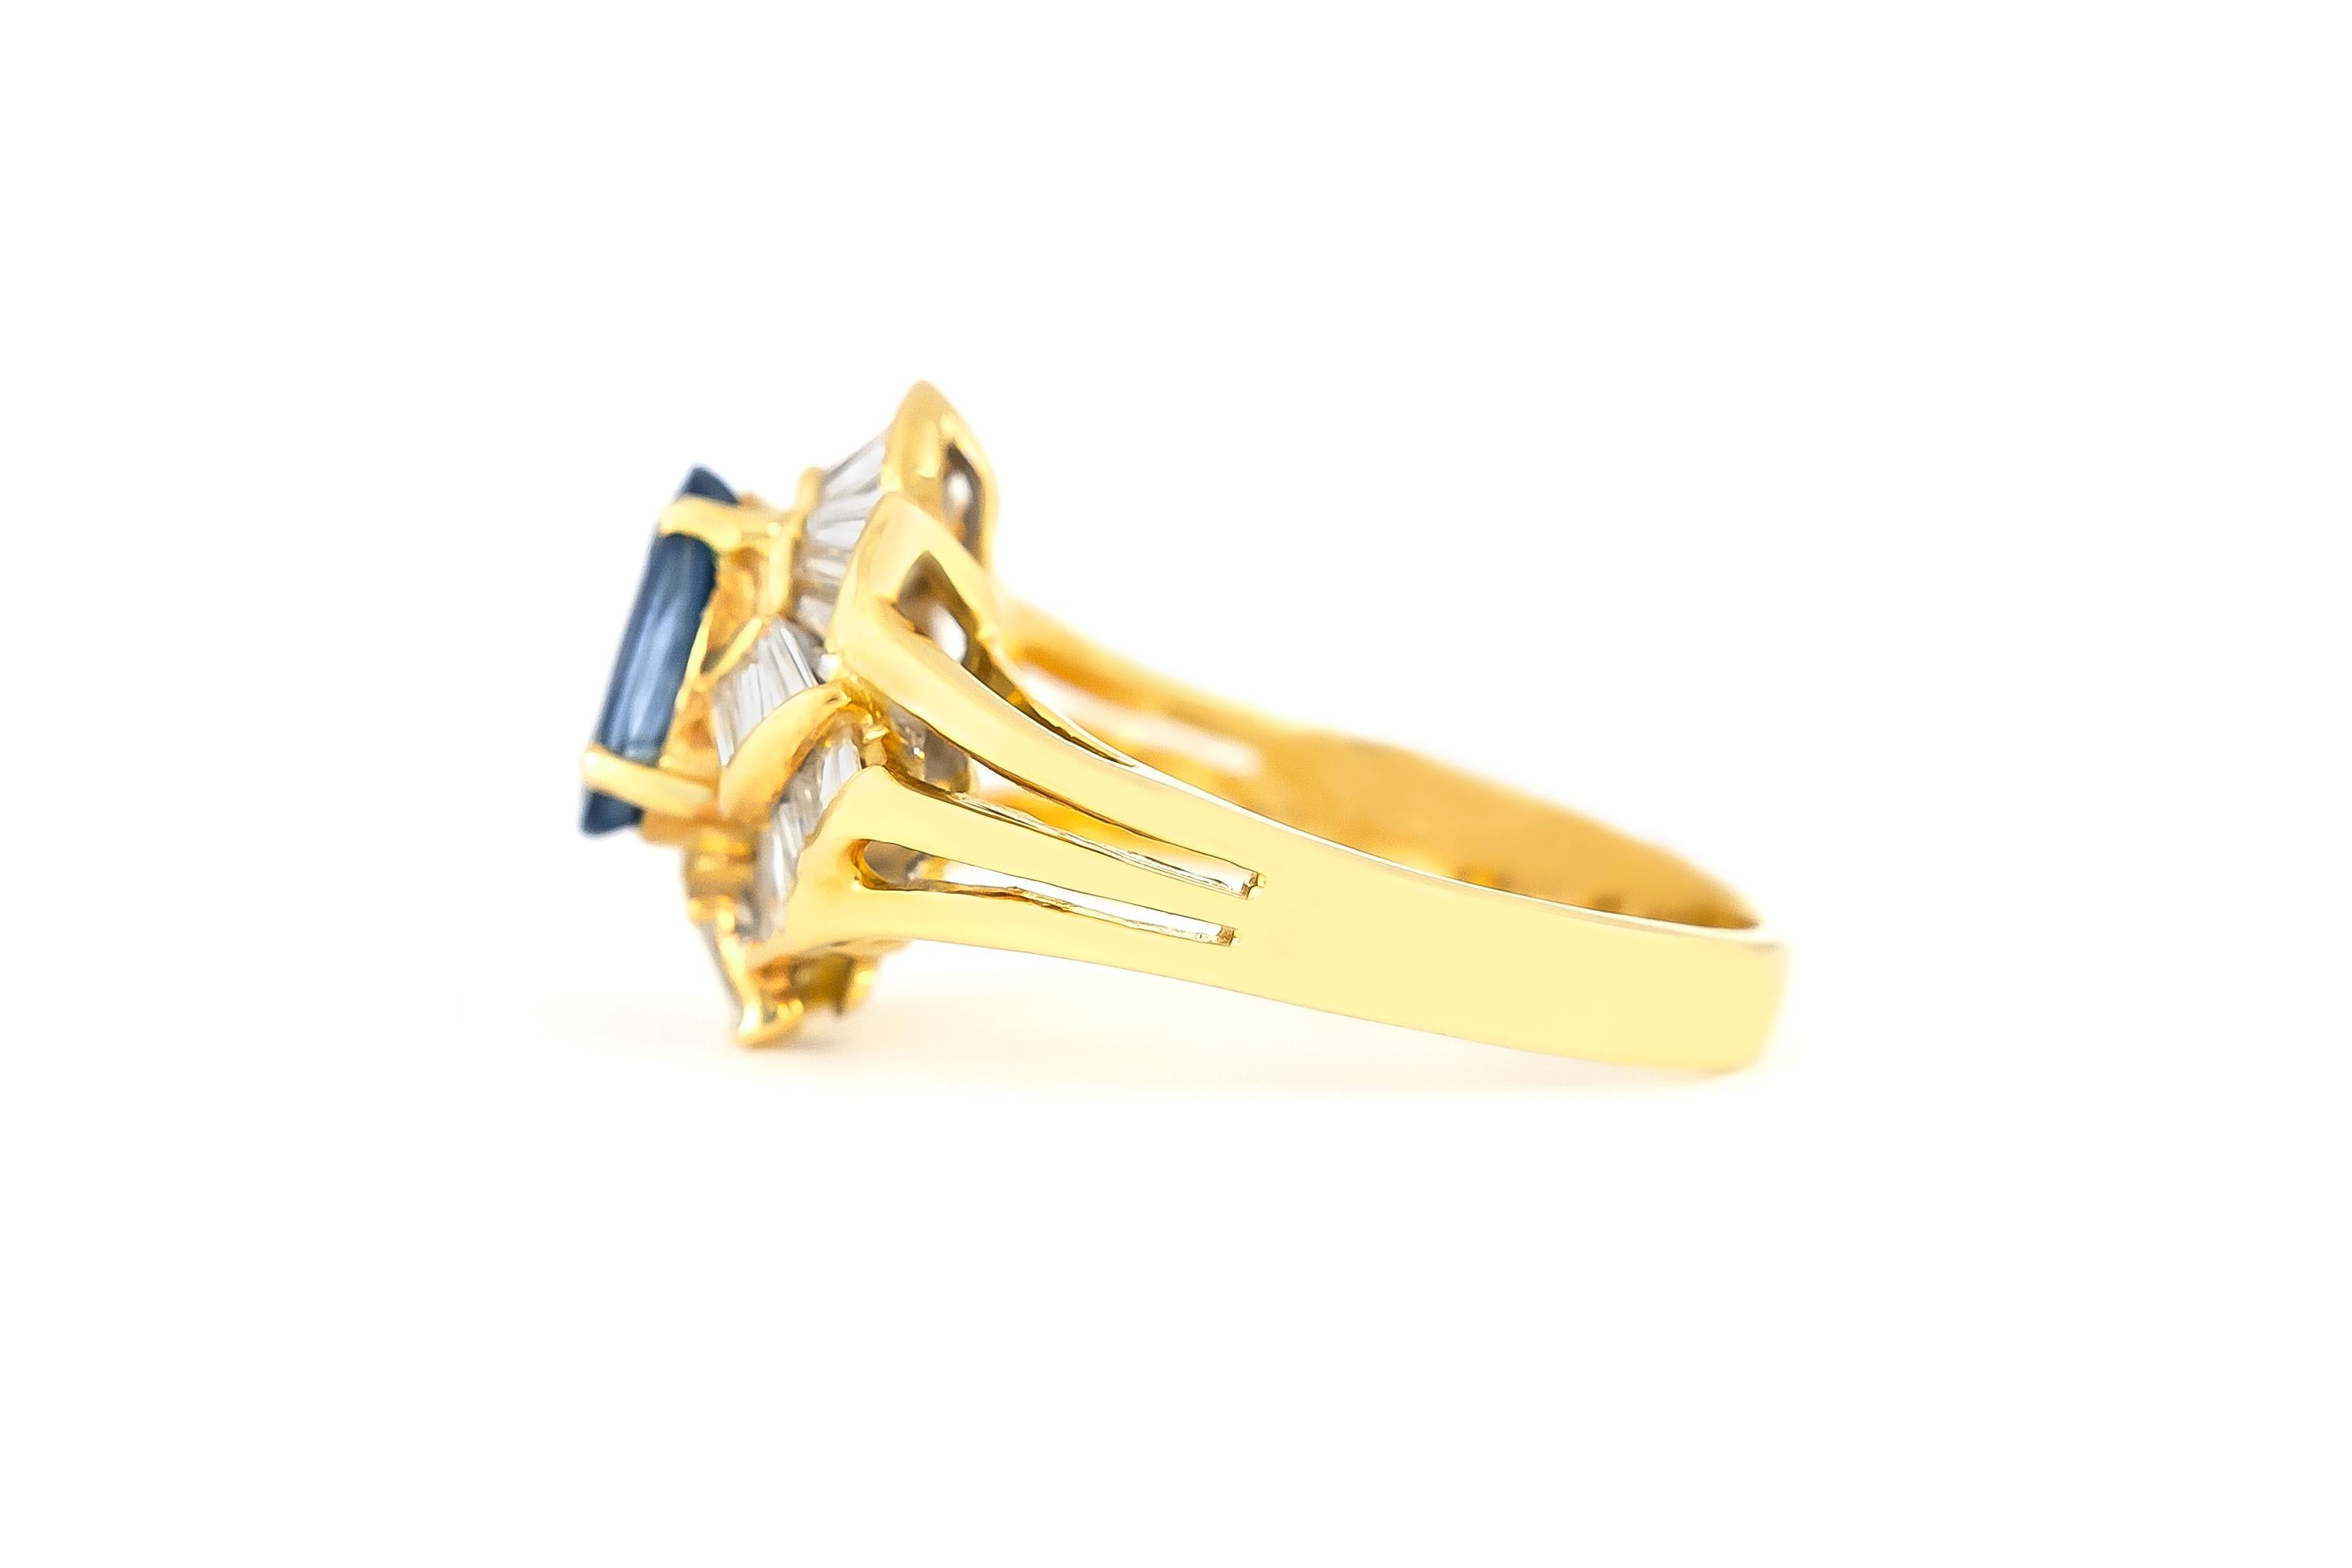 The ring is finely crafted in 14k yellow gold with center sapphire weighing approximately total of 1.28 carat and diamonds weighing approximately total of 0.85 carat.
Circa 1970.